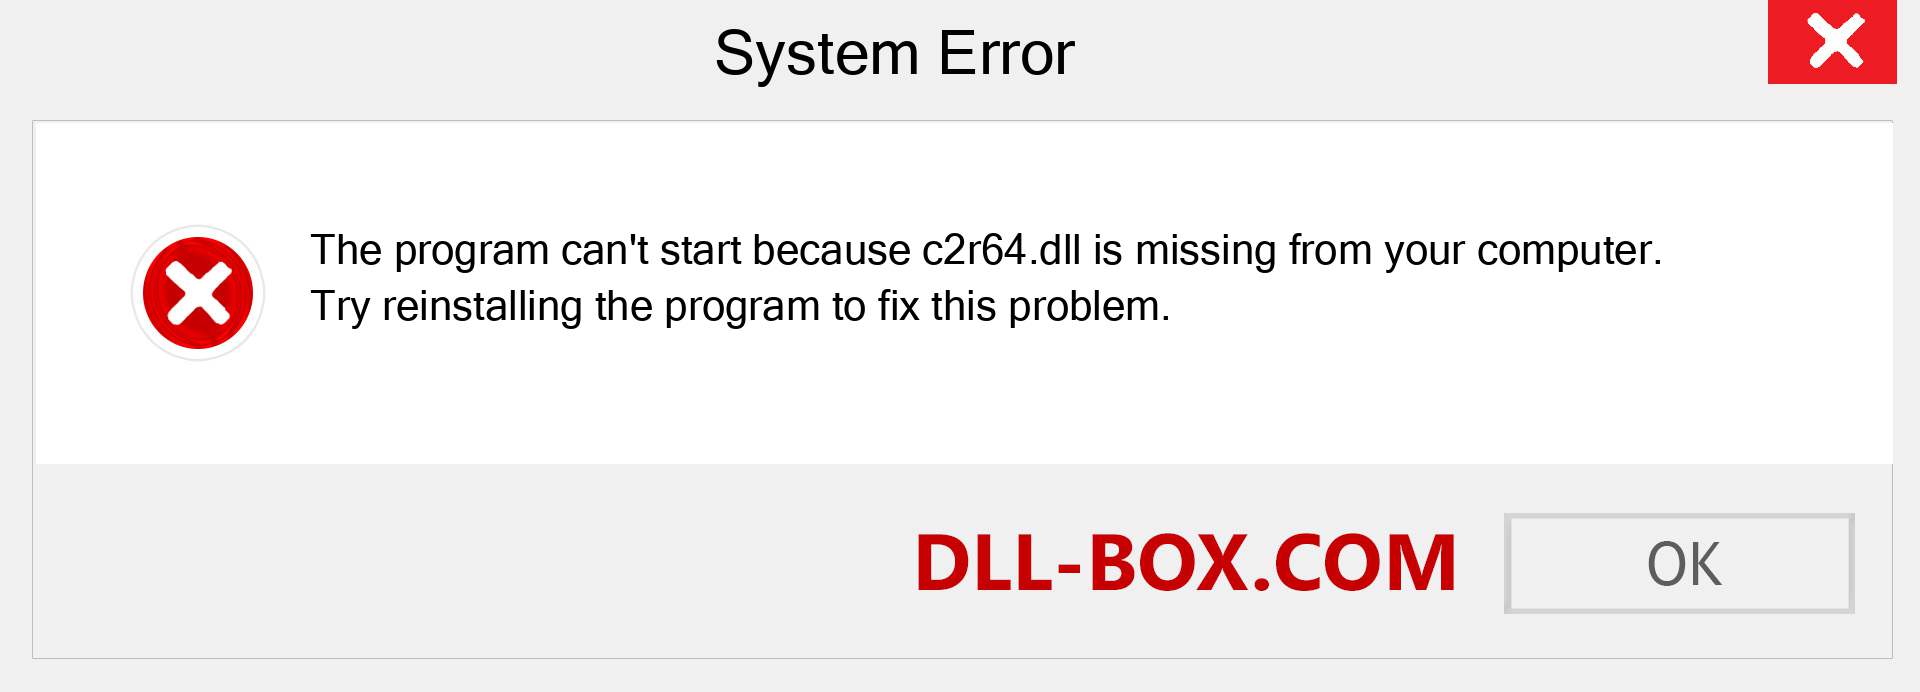  c2r64.dll file is missing?. Download for Windows 7, 8, 10 - Fix  c2r64 dll Missing Error on Windows, photos, images